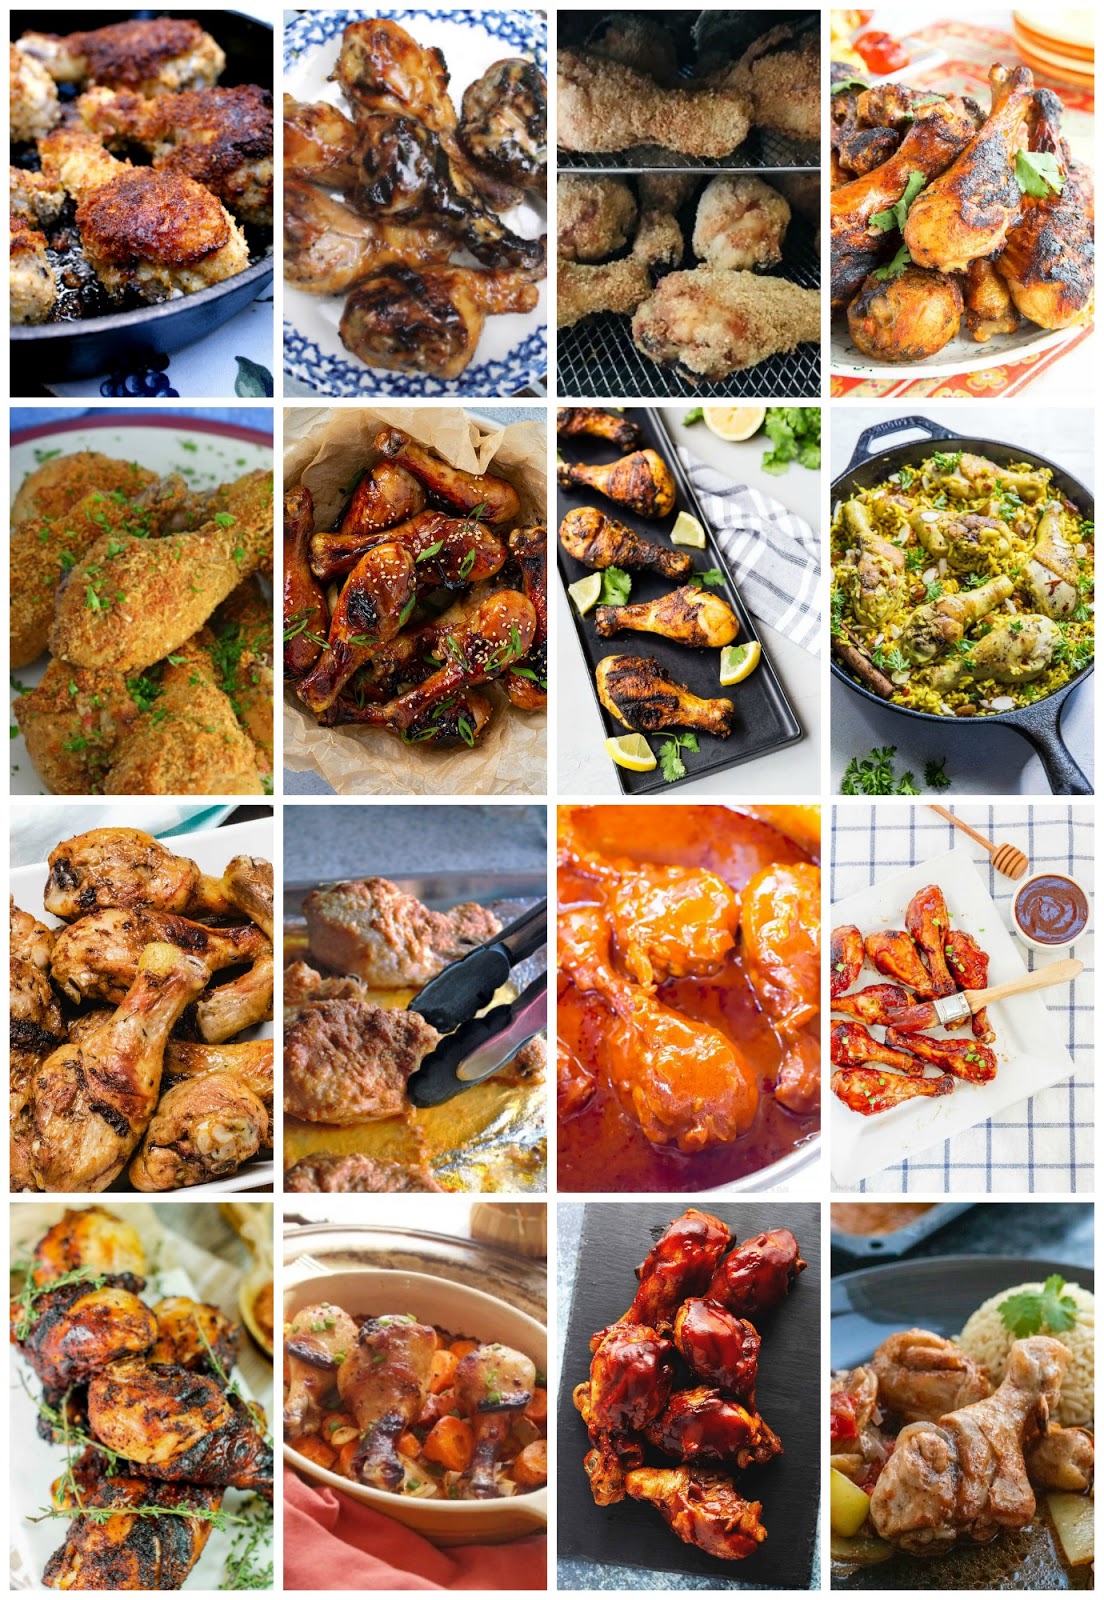 Are you looking for some bone-in chicken recipes? This roundup includes recipes for bone-in breasts, thighs, leg quarters, drumsticks, wings, and even whole chicken recipes! #boneinchicken #chickenrecipes #chicken